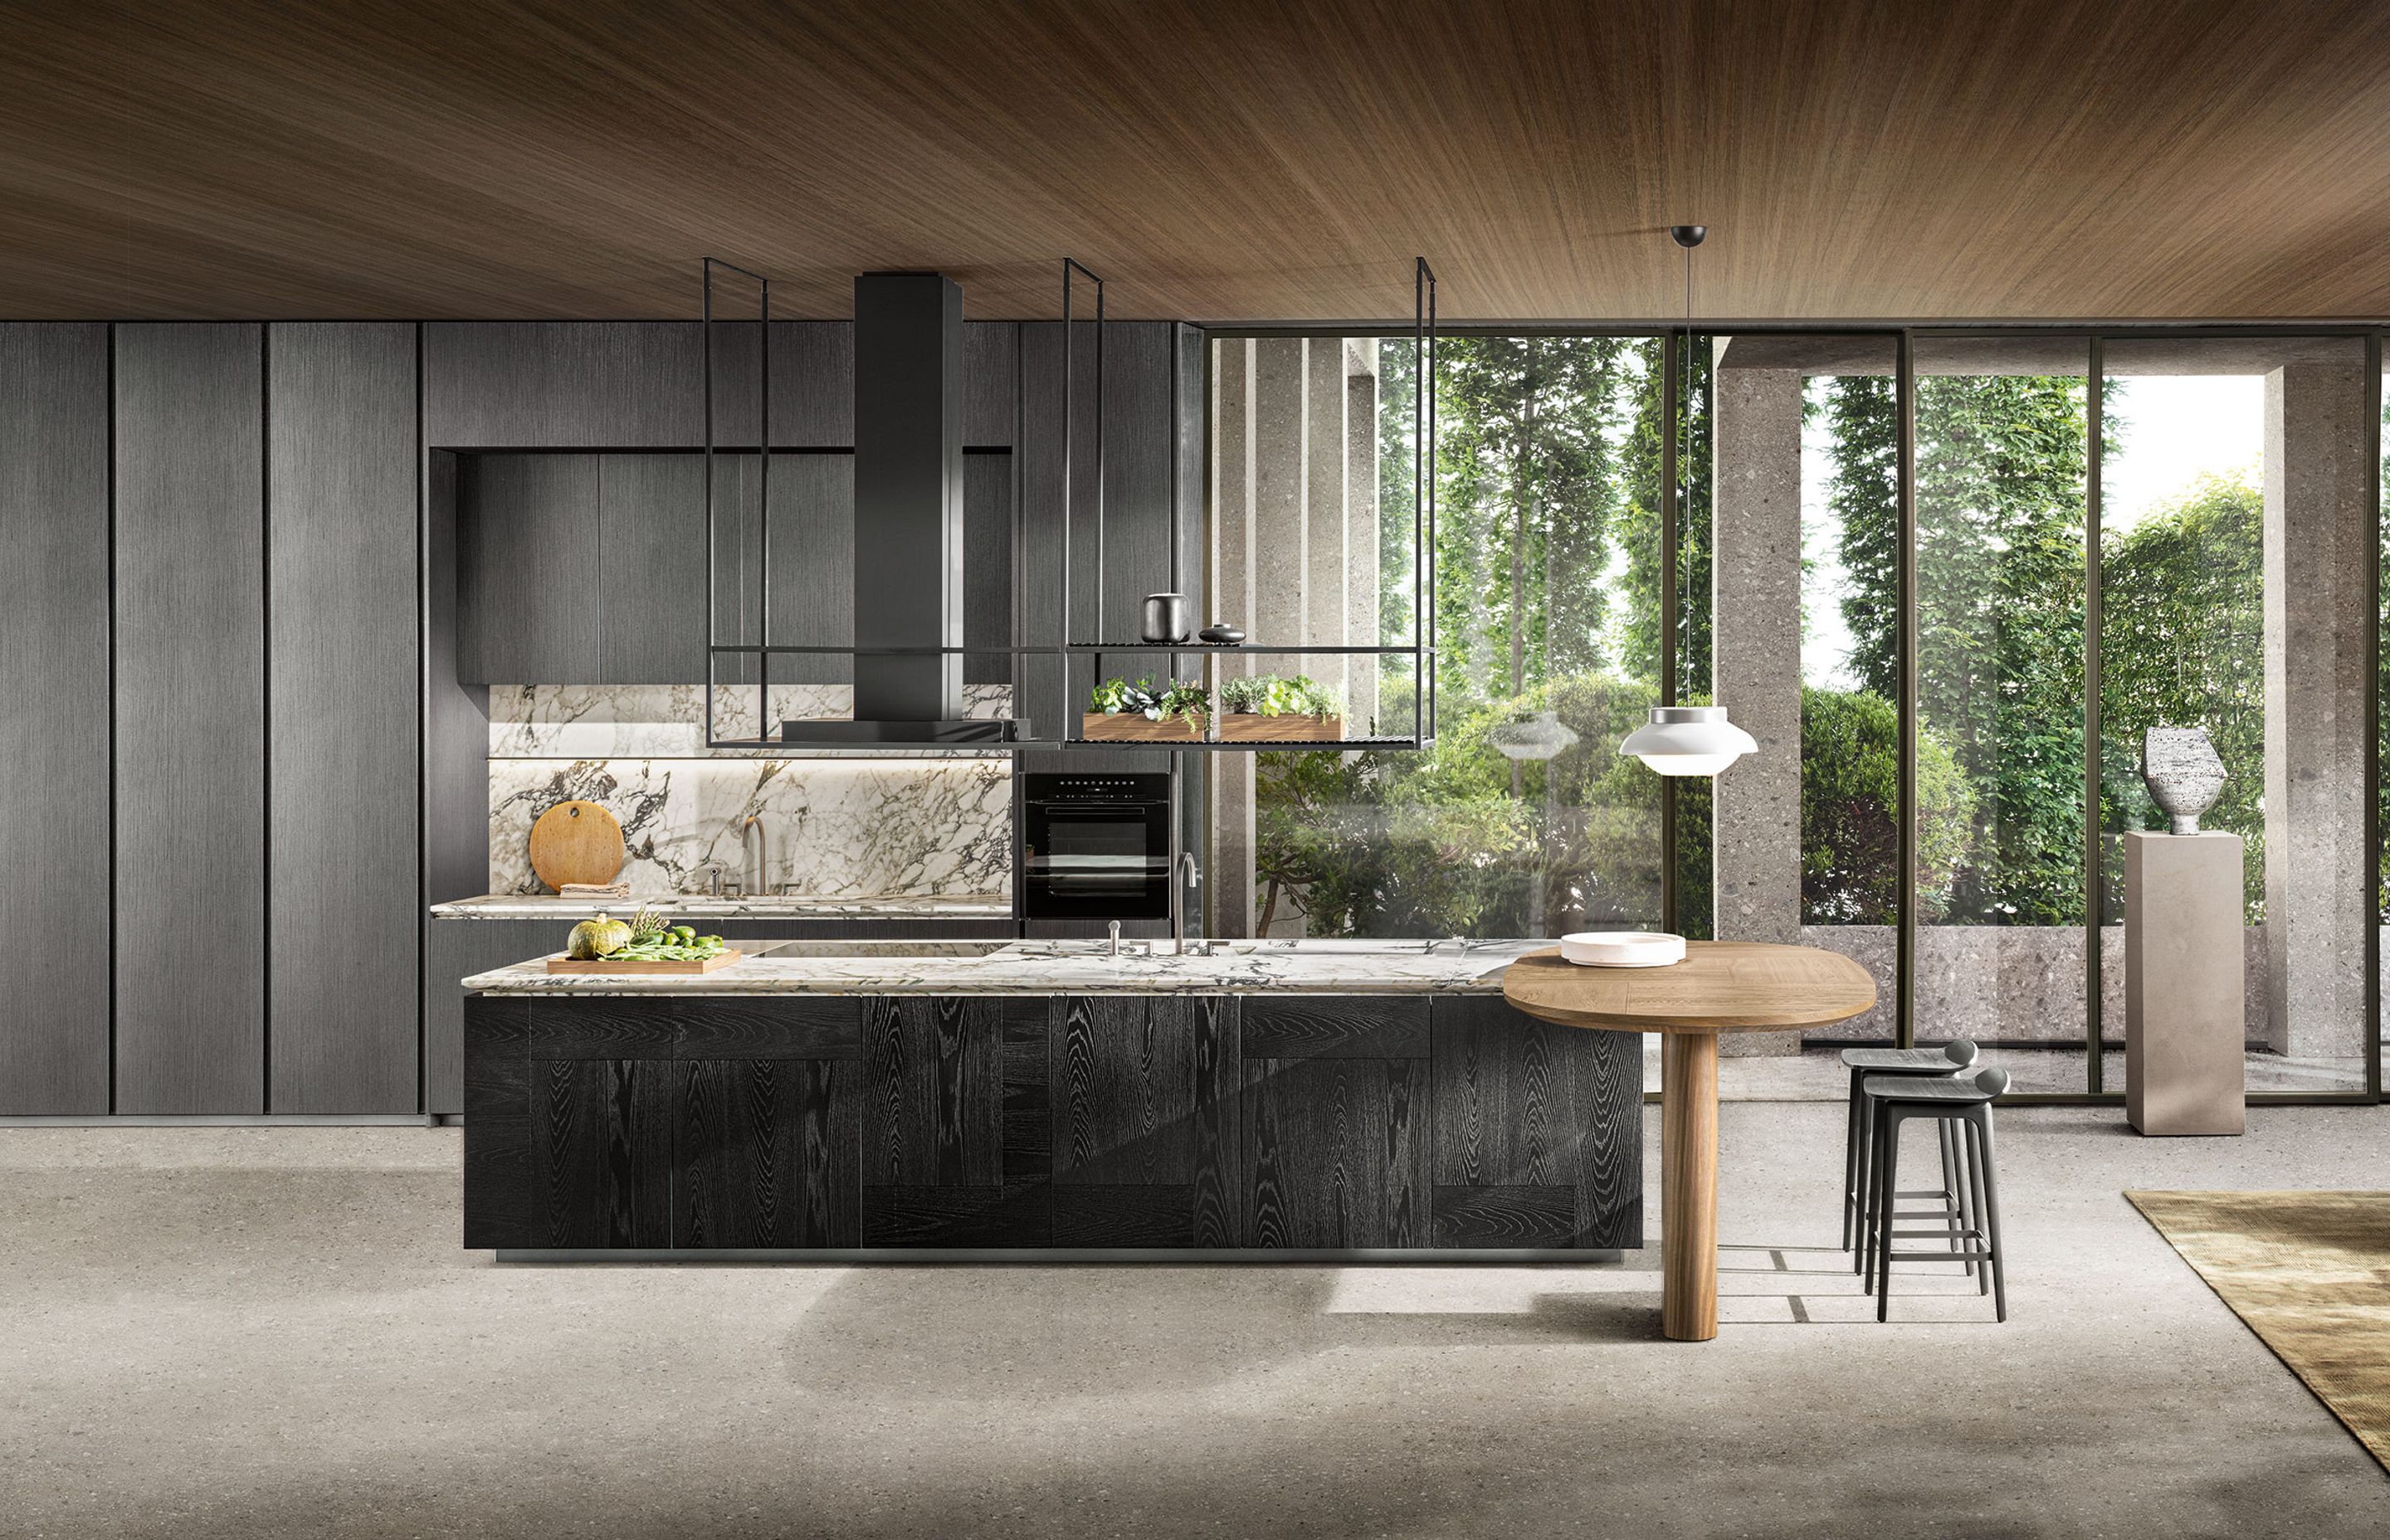 Paying homage to both Piet Mondrian and Carlo Scarpa, Intersection by Vincent Van Duysen is a kitchen with a strong expressive character and refined details that combine in unparalleled craftsmanship.